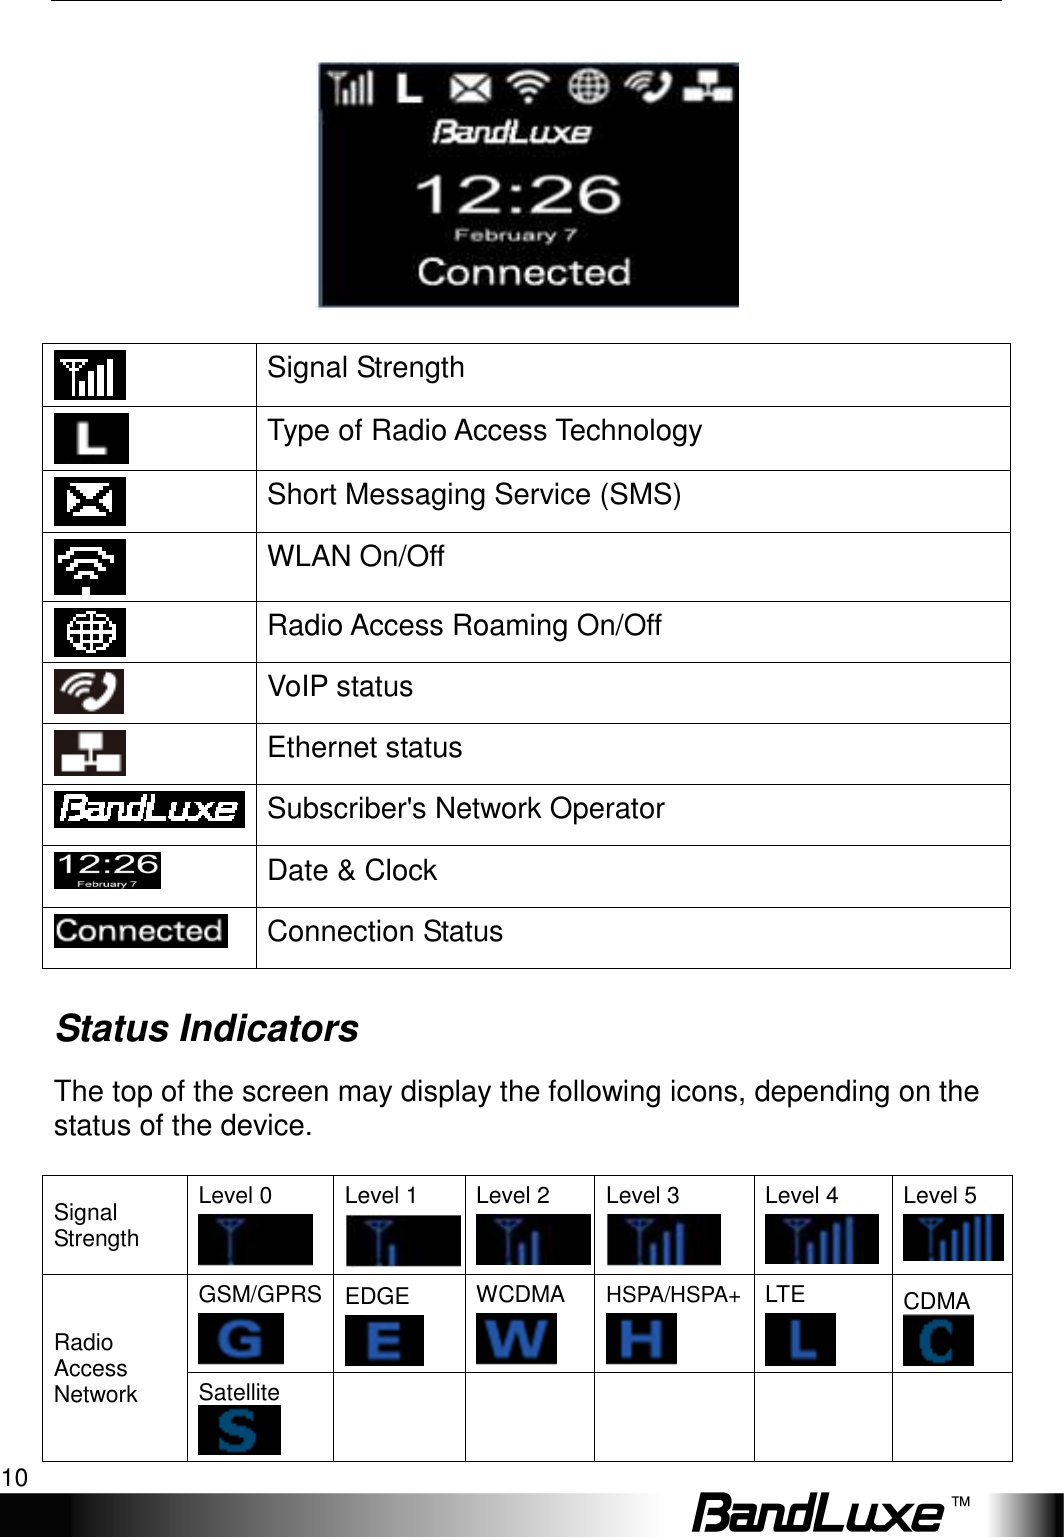 Installation 10      Signal Strength  Type of Radio Access Technology  Short Messaging Service (SMS)  WLAN On/Off  Radio Access Roaming On/Off  VoIP status  Ethernet status  Subscriber&apos;s Network Operator  Date &amp; Clock  Connection Status Status Indicators The top of the screen may display the following icons, depending on the status of the device.  Signal Strength Level 0  Level 1  Level 2  Level 3  Level 4  Level 5  Radio Access Network GSM/GPRS  EDGE  WCDMA  HSPA/HSPA+  LTE  CDMA Satellite        